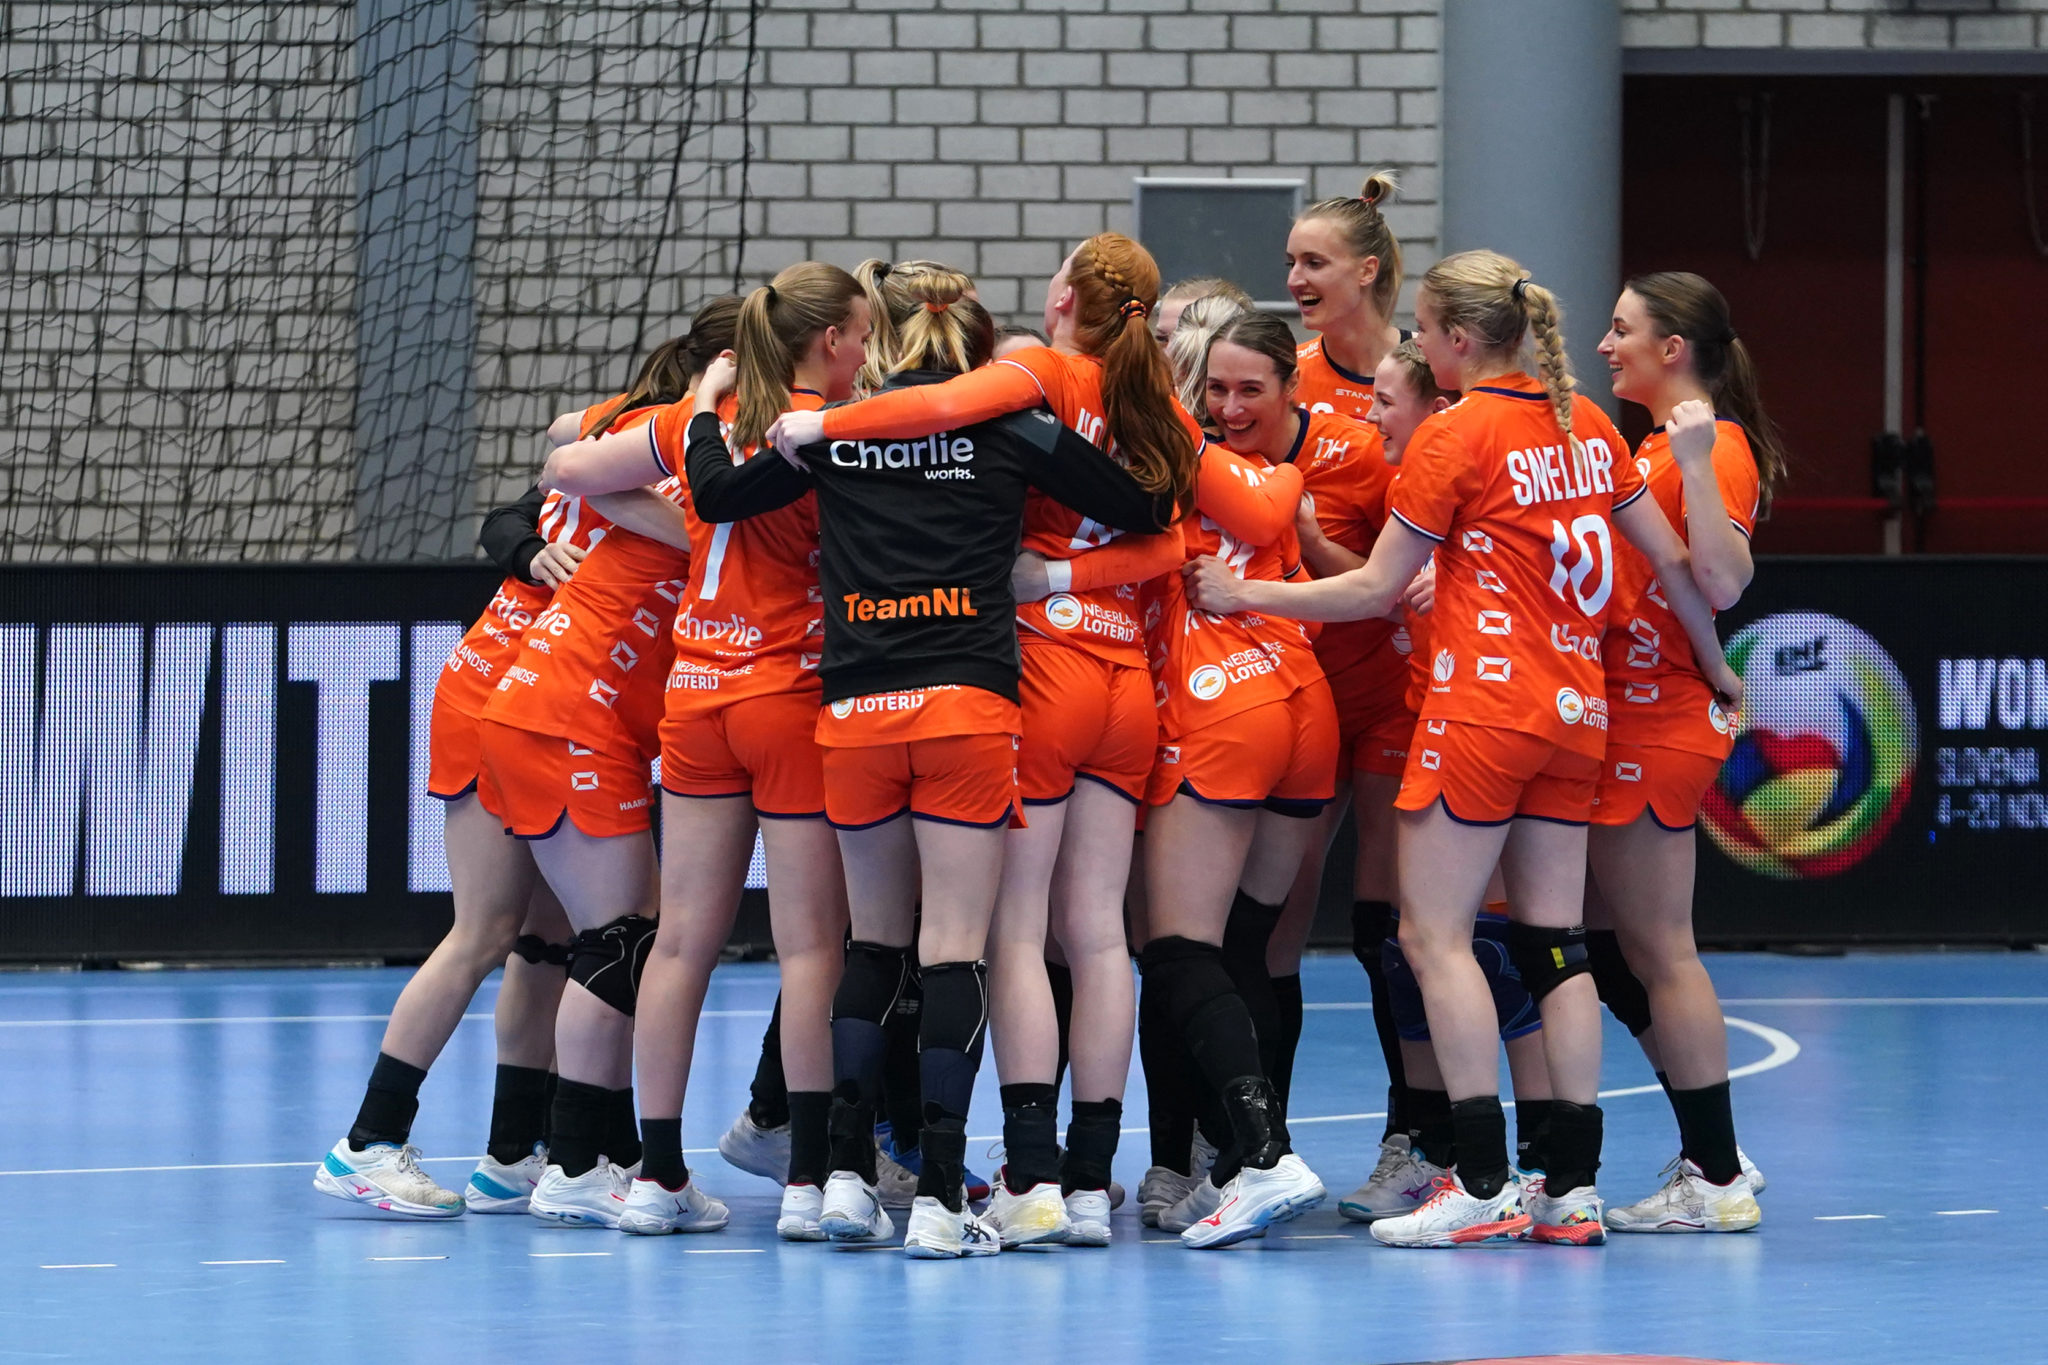 5-3-2022 HANDBAL:NEDERLAND-DUITSLAND:ROTTERDAM
The Dutch Celebrates The Victory During The European Qualification Match Between The Netherlands And Germany At Topsportcentrum On March 5, 2022 In Rotterdam, The Netherlands (Photo By Henk Seppen)